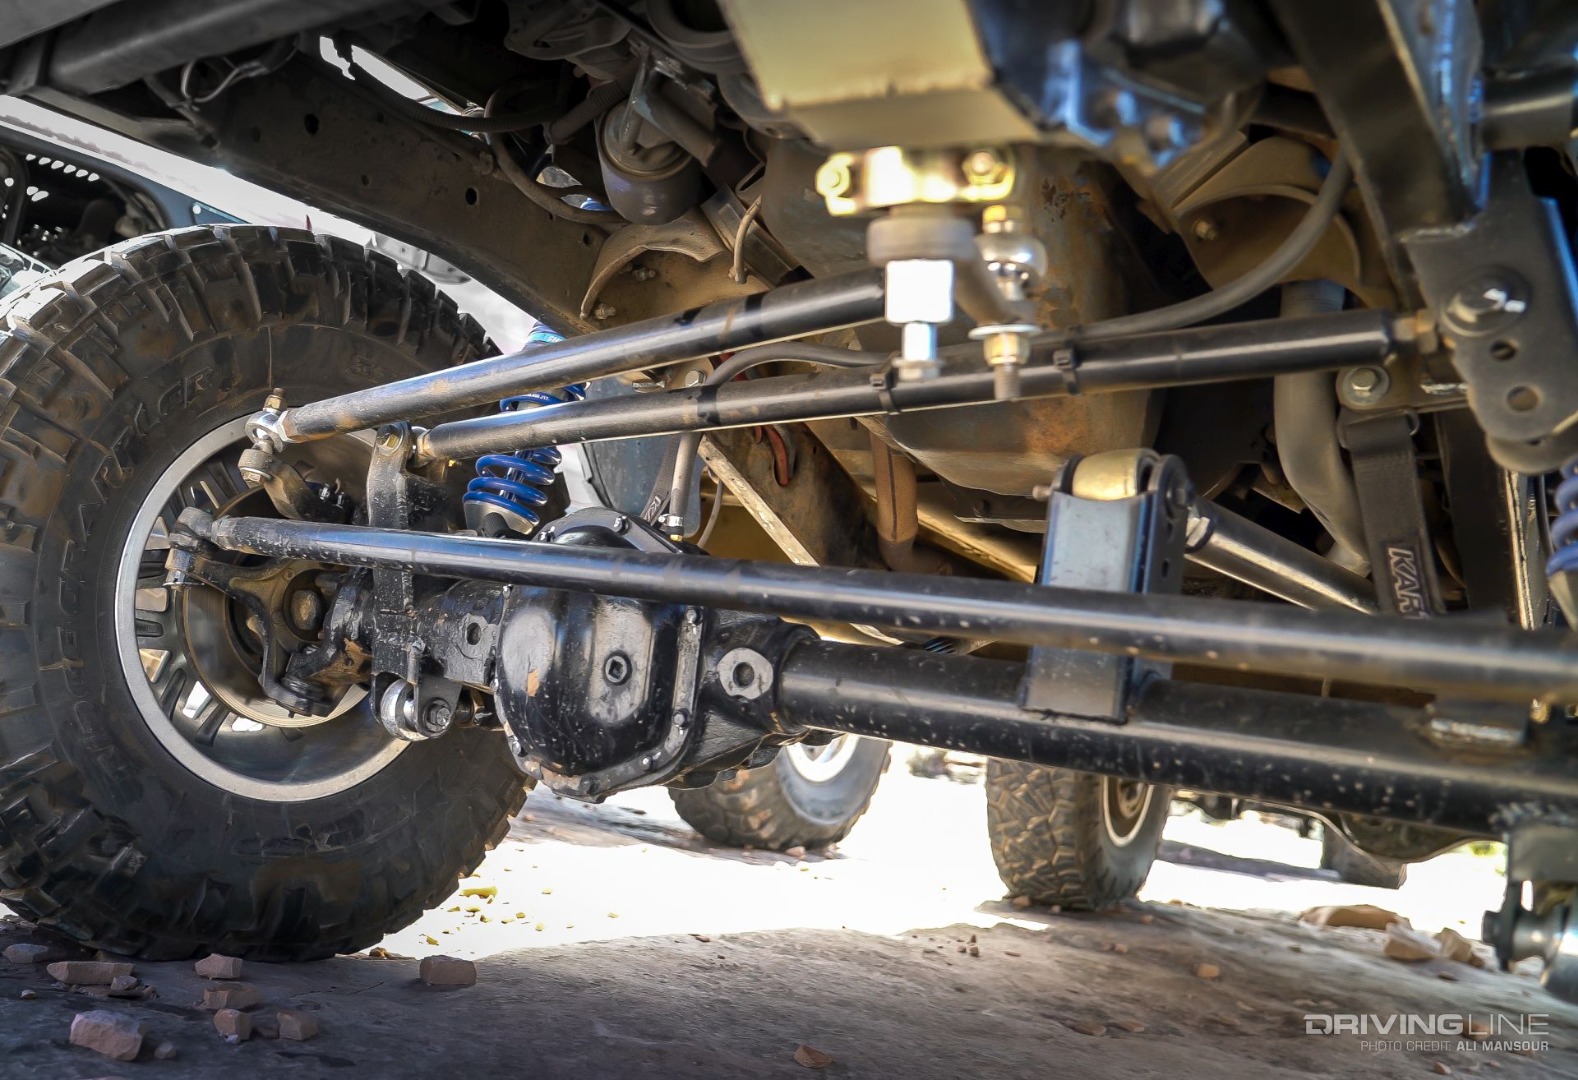 The Dana 44 Story: How This Ultra-Tough Axle Became An Off-Road Legend |  DrivingLine